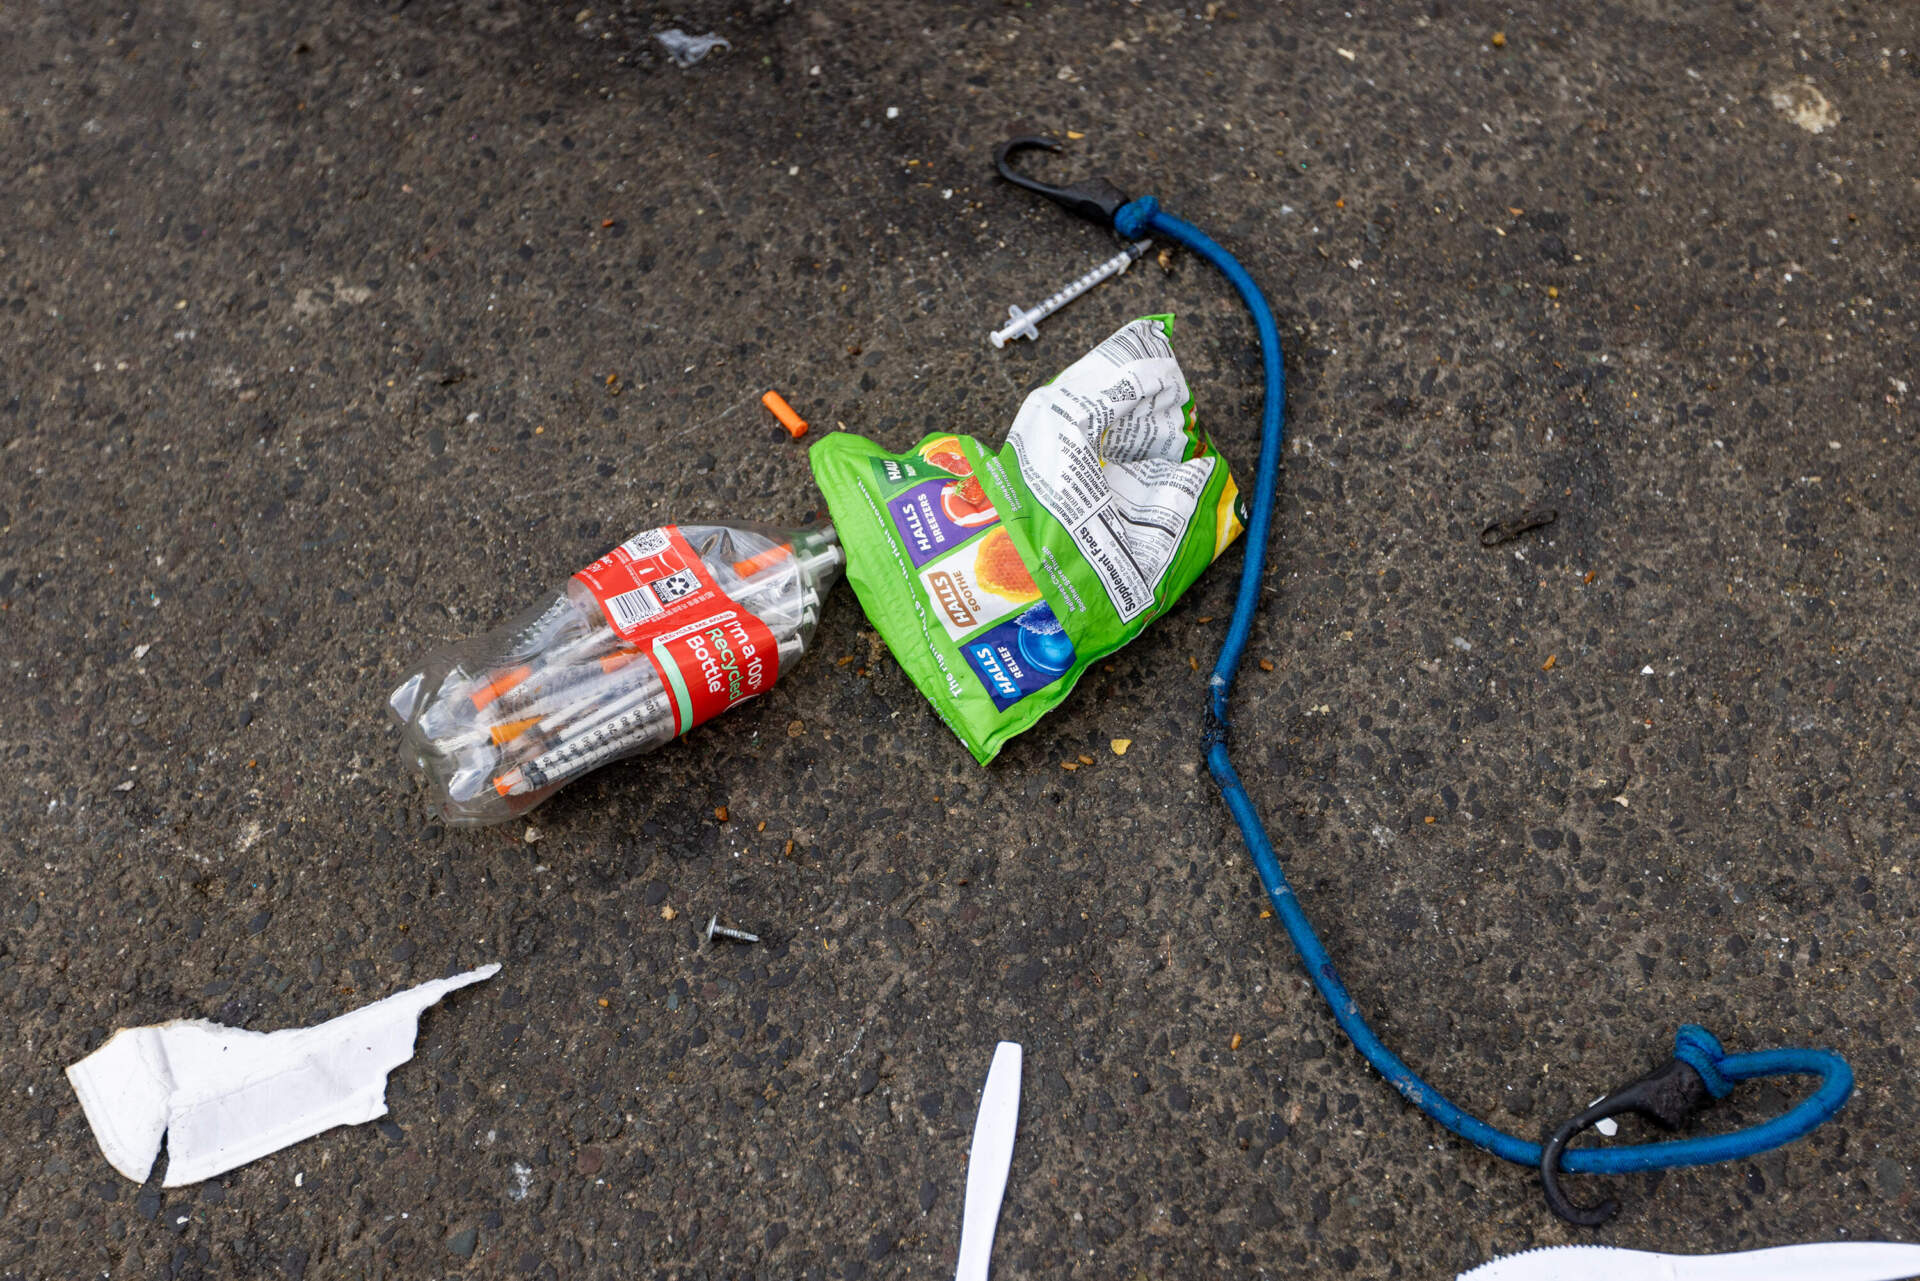 A bag and Coca-Cola bottle filled with syringes is seen on the ground during the tent encampment removal on Atkinson Street in the area known as &quot;Mass and Cass.&quot; (Jesse Costa/WBUR)